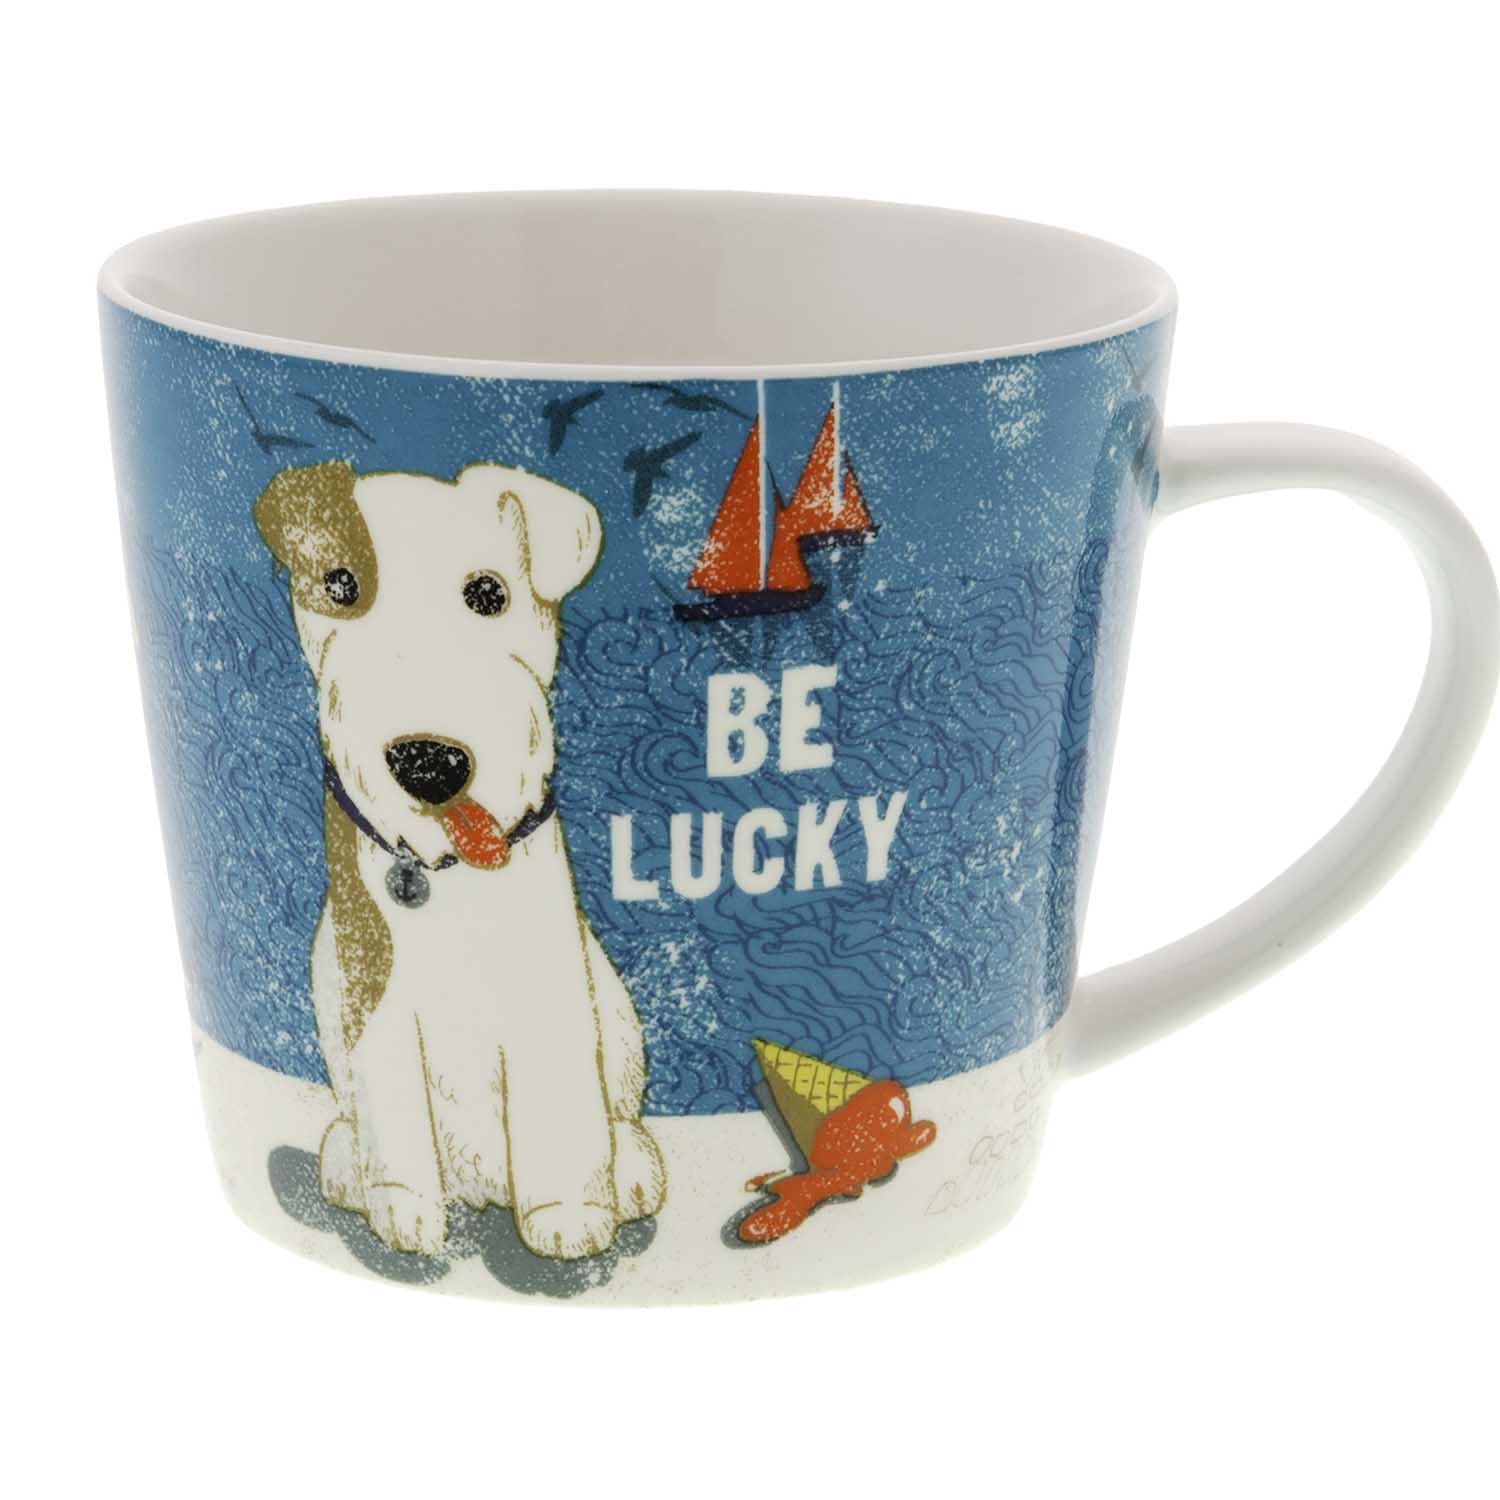 Dog Lover Gifts available at Dog Krazy Gifts – Jill White Rocket68 Ahoy Mug available at www.dogkrazygifts.co.uk